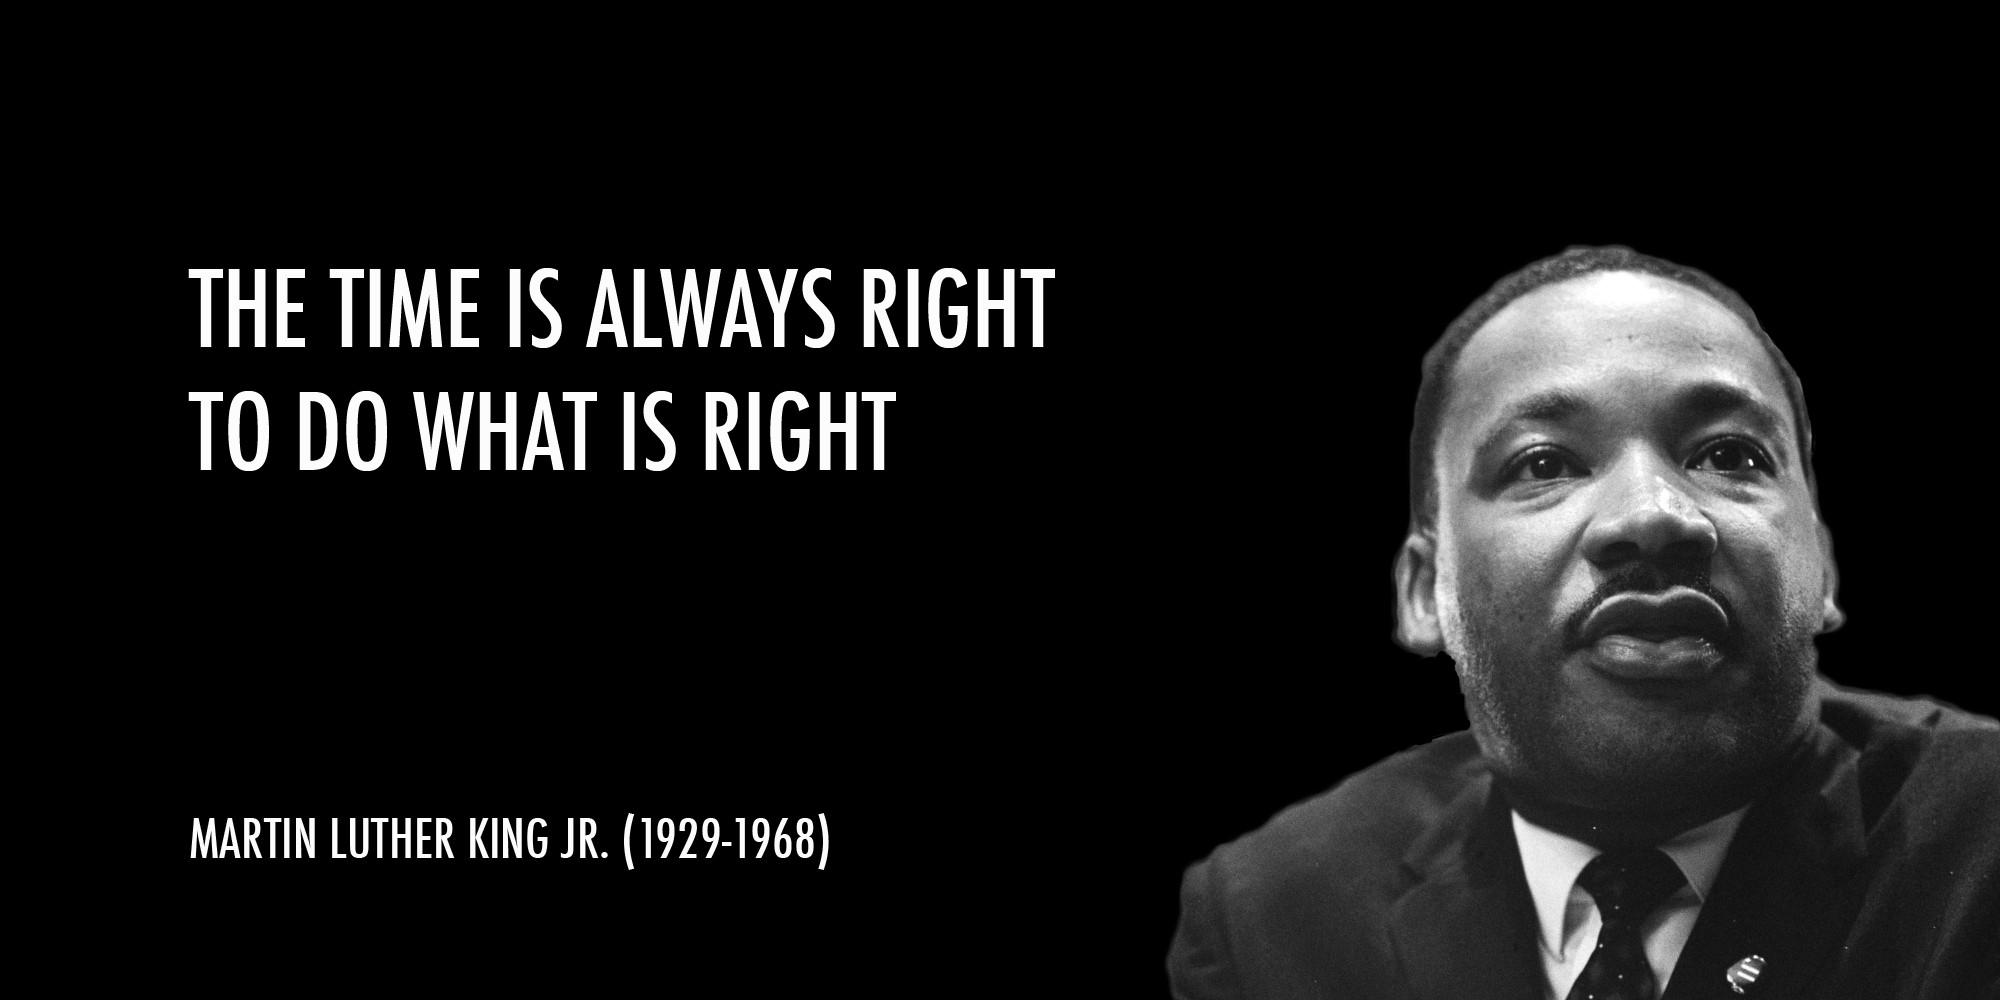 Martin Luther King Jr.Leadership Quotes
 In Memoriam